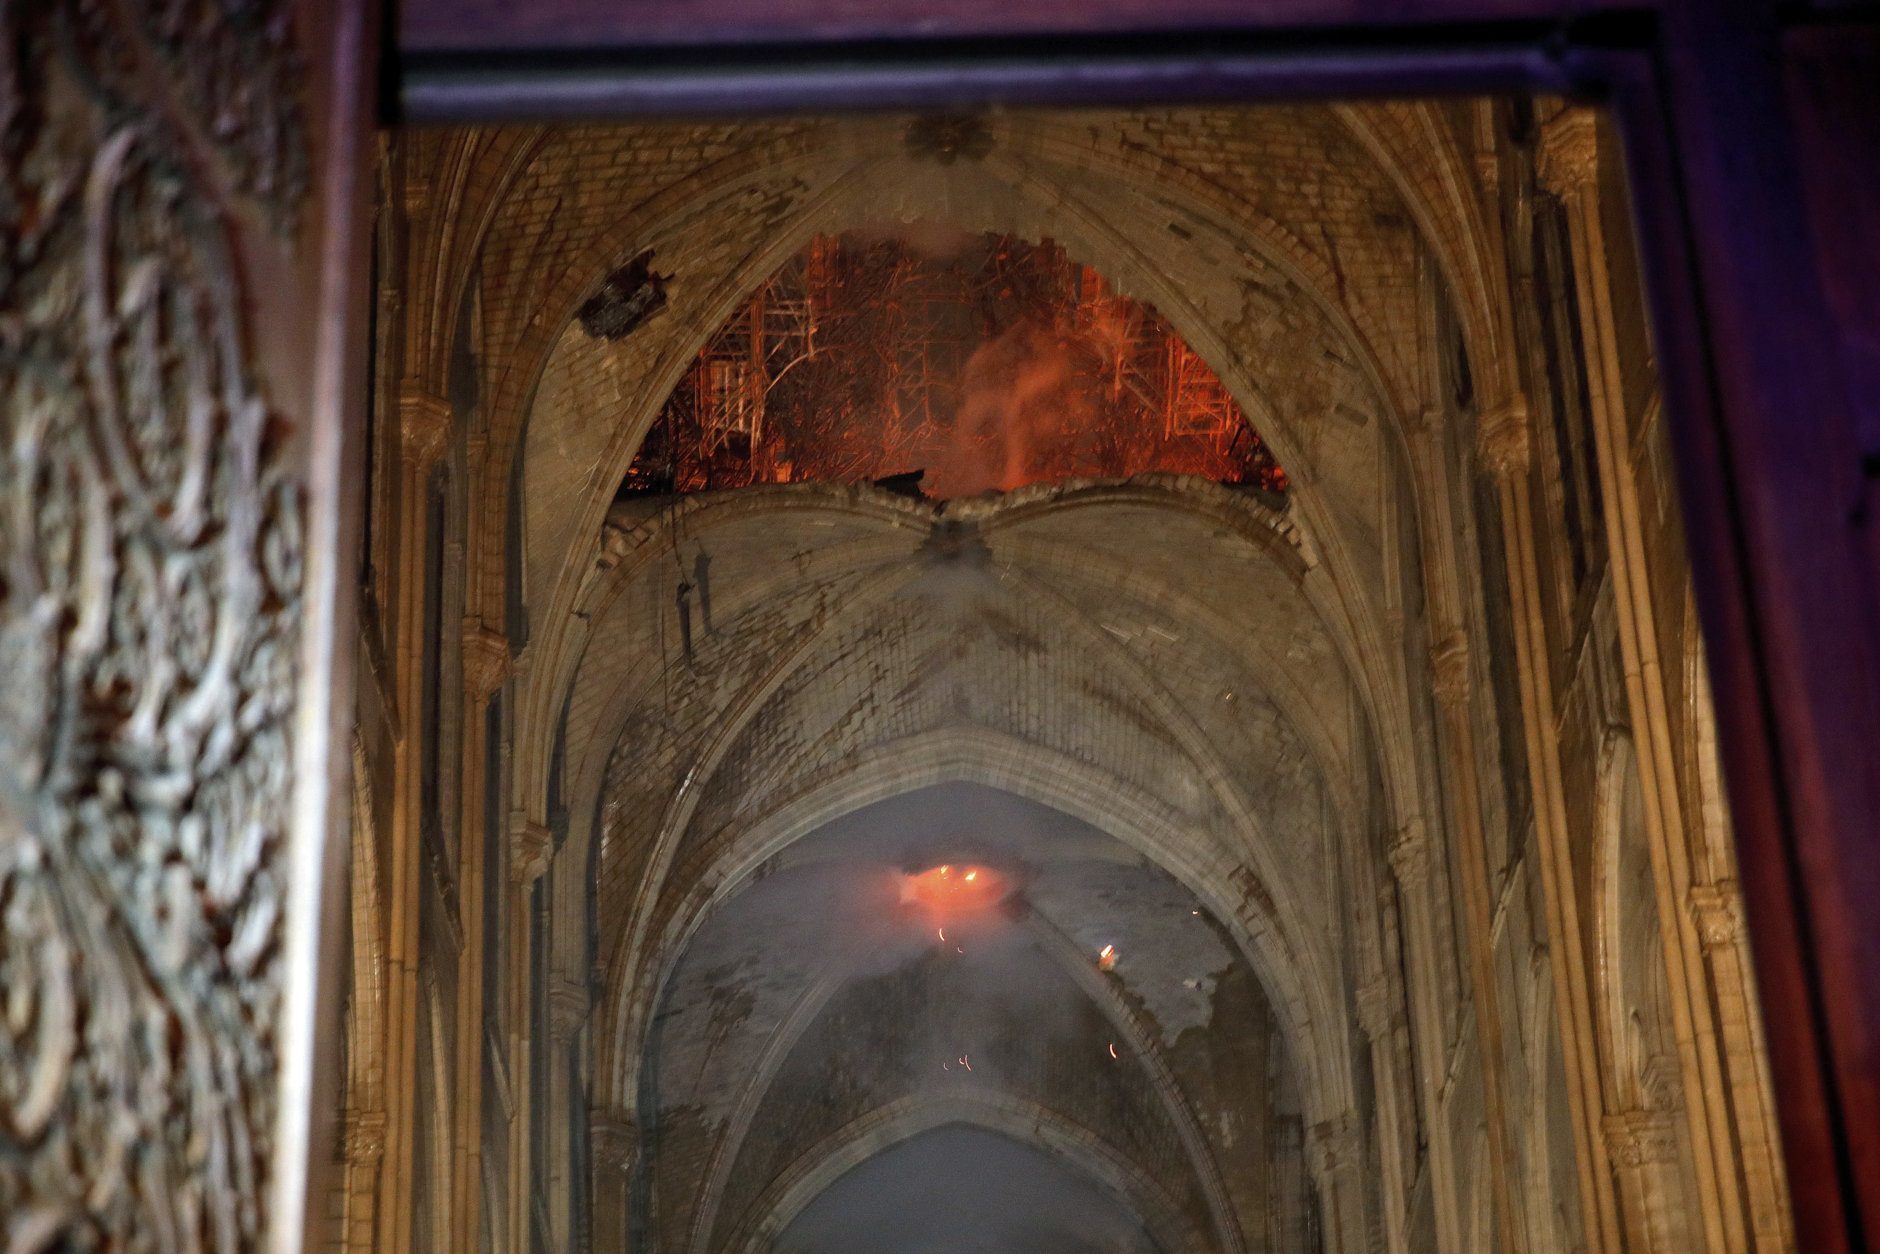 Flames and smoke are seen as the interior at Notre Dame cathedral in Paris, Monday, April 15, 2019. A catastrophic fire engulfed the upper reaches of Paris' soaring Notre Dame Cathedral as it was undergoing renovations Monday, threatening one of the greatest architectural treasures of the Western world as tourists and Parisians looked on aghast from the streets below. (Philippe Wojazer/Pool via AP)